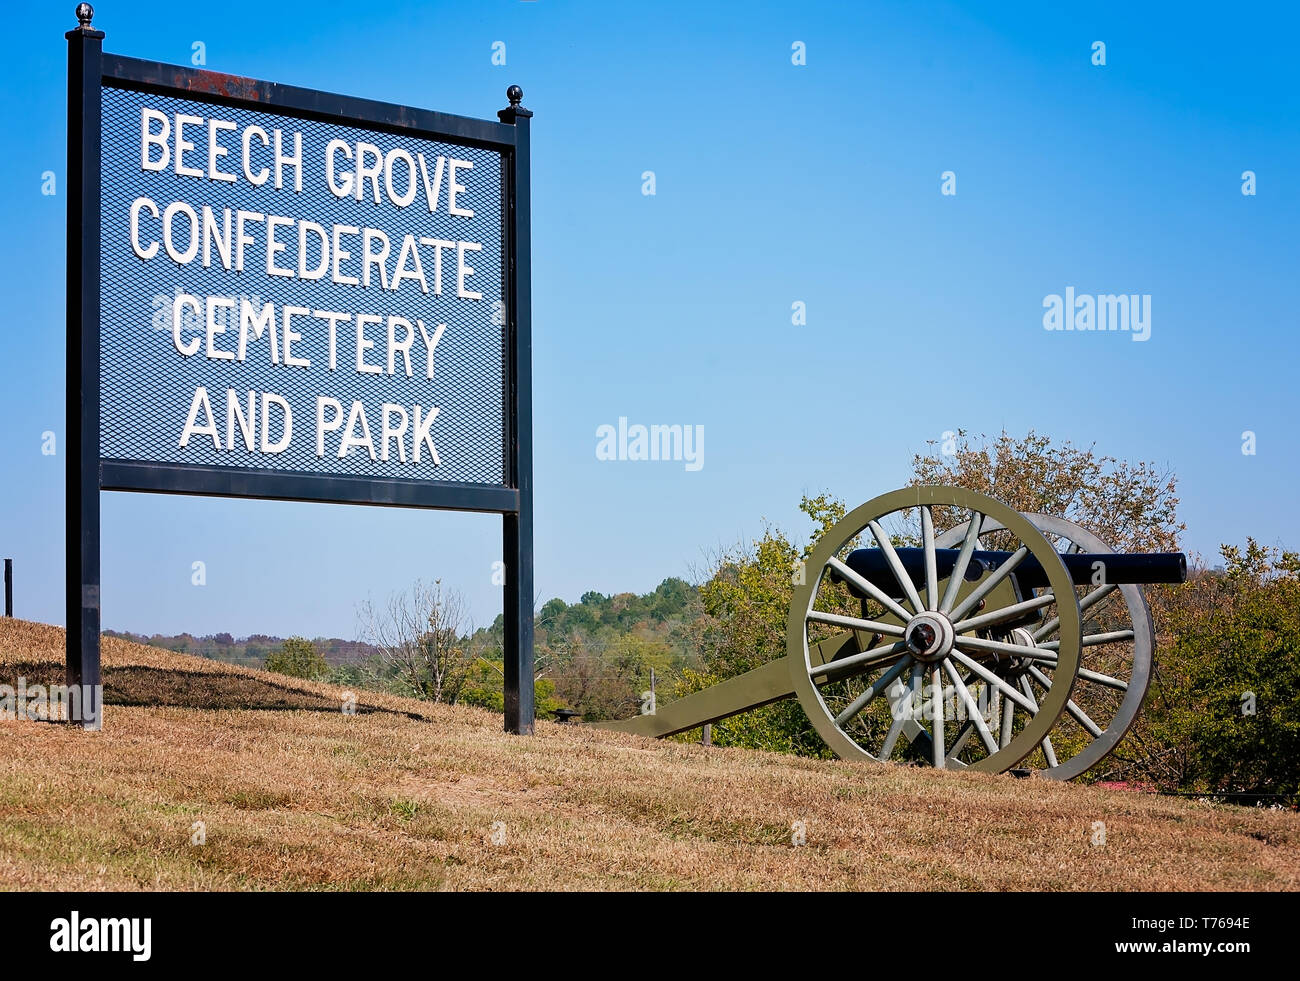 The Beech Grove Confederate Cemetery and Park entrance sign is displayed beside a Civil War cannon, Oct. 7, 2010, in Beechgrove, Tennessee. Stock Photo